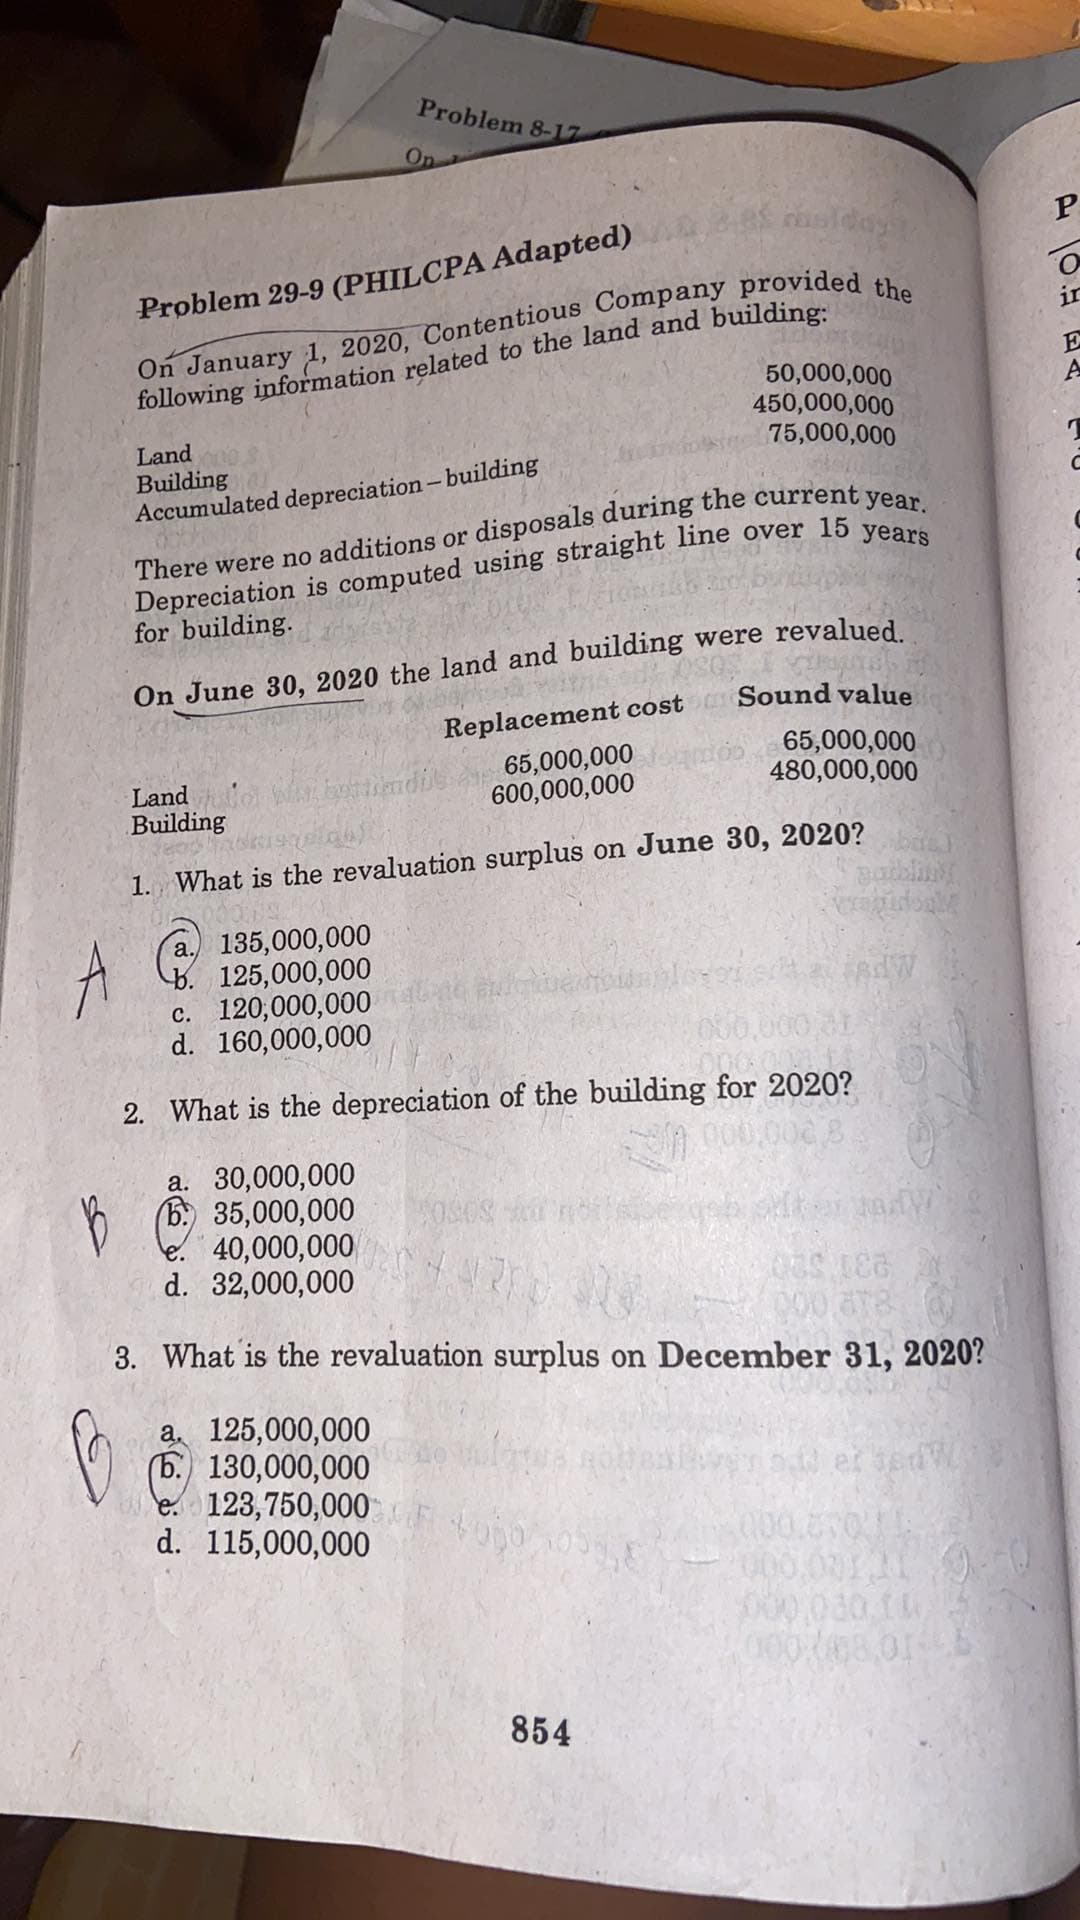 Problem 8-17
On
mslday
Problem 29-9 (PHILCPA Adapted)
following information related to the land and building:
50,000,000
450,000,000
in
E
75,000,000
Land
Building
Accumulated depreciation-building
for building.
On June 30, 2020 the land and building were revalued
Replacement cost Sound value
65,000,000
480,000,000
Land w biendie
Building
65,000,000
600,000,000
1. What is the revaluation surplus on June 30, 2020?
salbling
a. 135,000,000
b. 125,000,000
c. 120,000,000
d. 160,000,000
00
2. What is the depreciation of the building for 2020?
a. 30,000,000
(6. 35,000,000
le. 40,000,000
d. 32,000,000
3. What is the revaluation surplus on December 31, 2020?
(6. 130,000,000
e 123,750,000
d. 115,000,000
et sedW
000,001119-
000008.01
854
